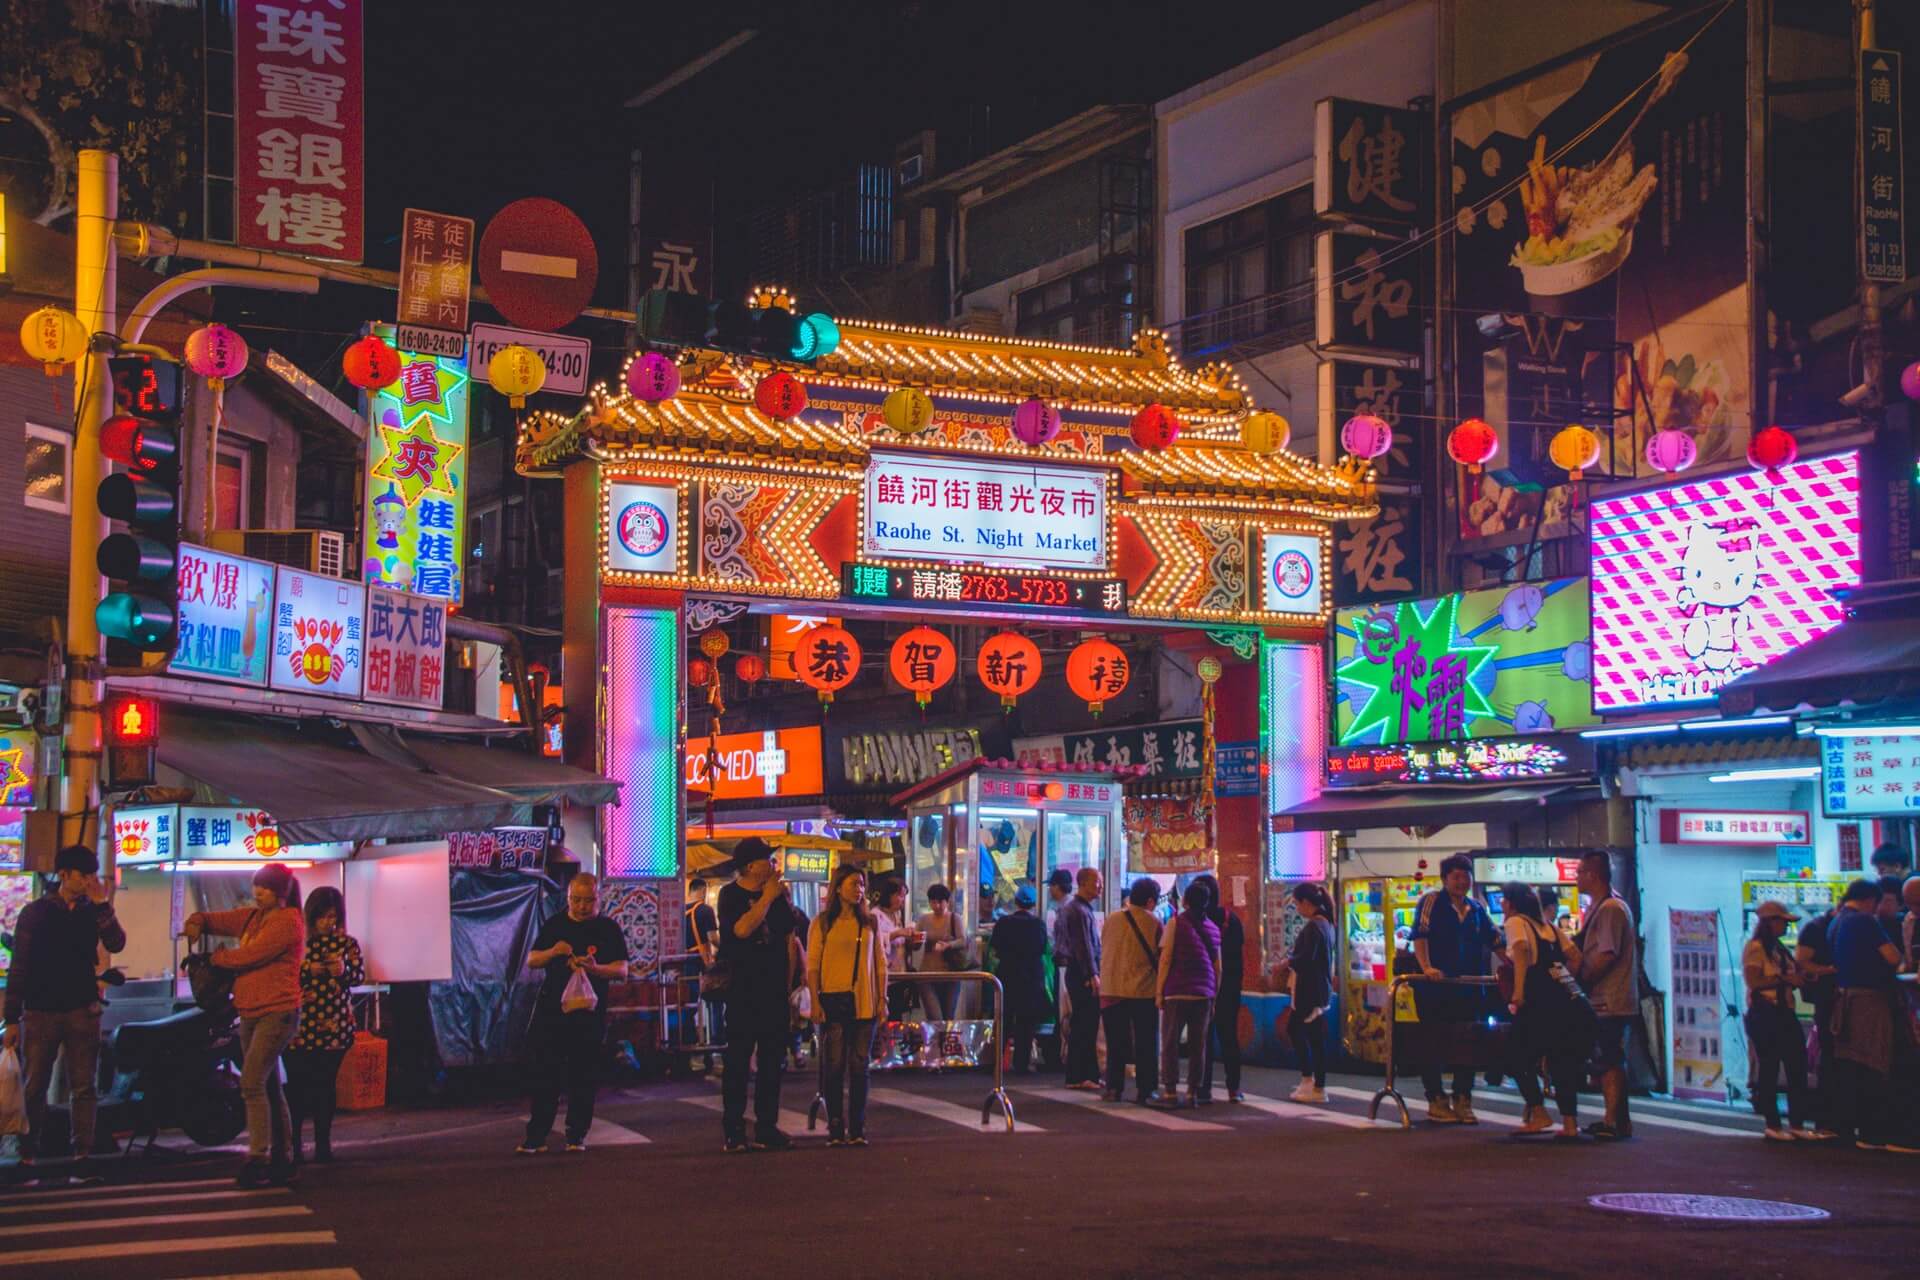 neon lights lit up in a night market in taipei